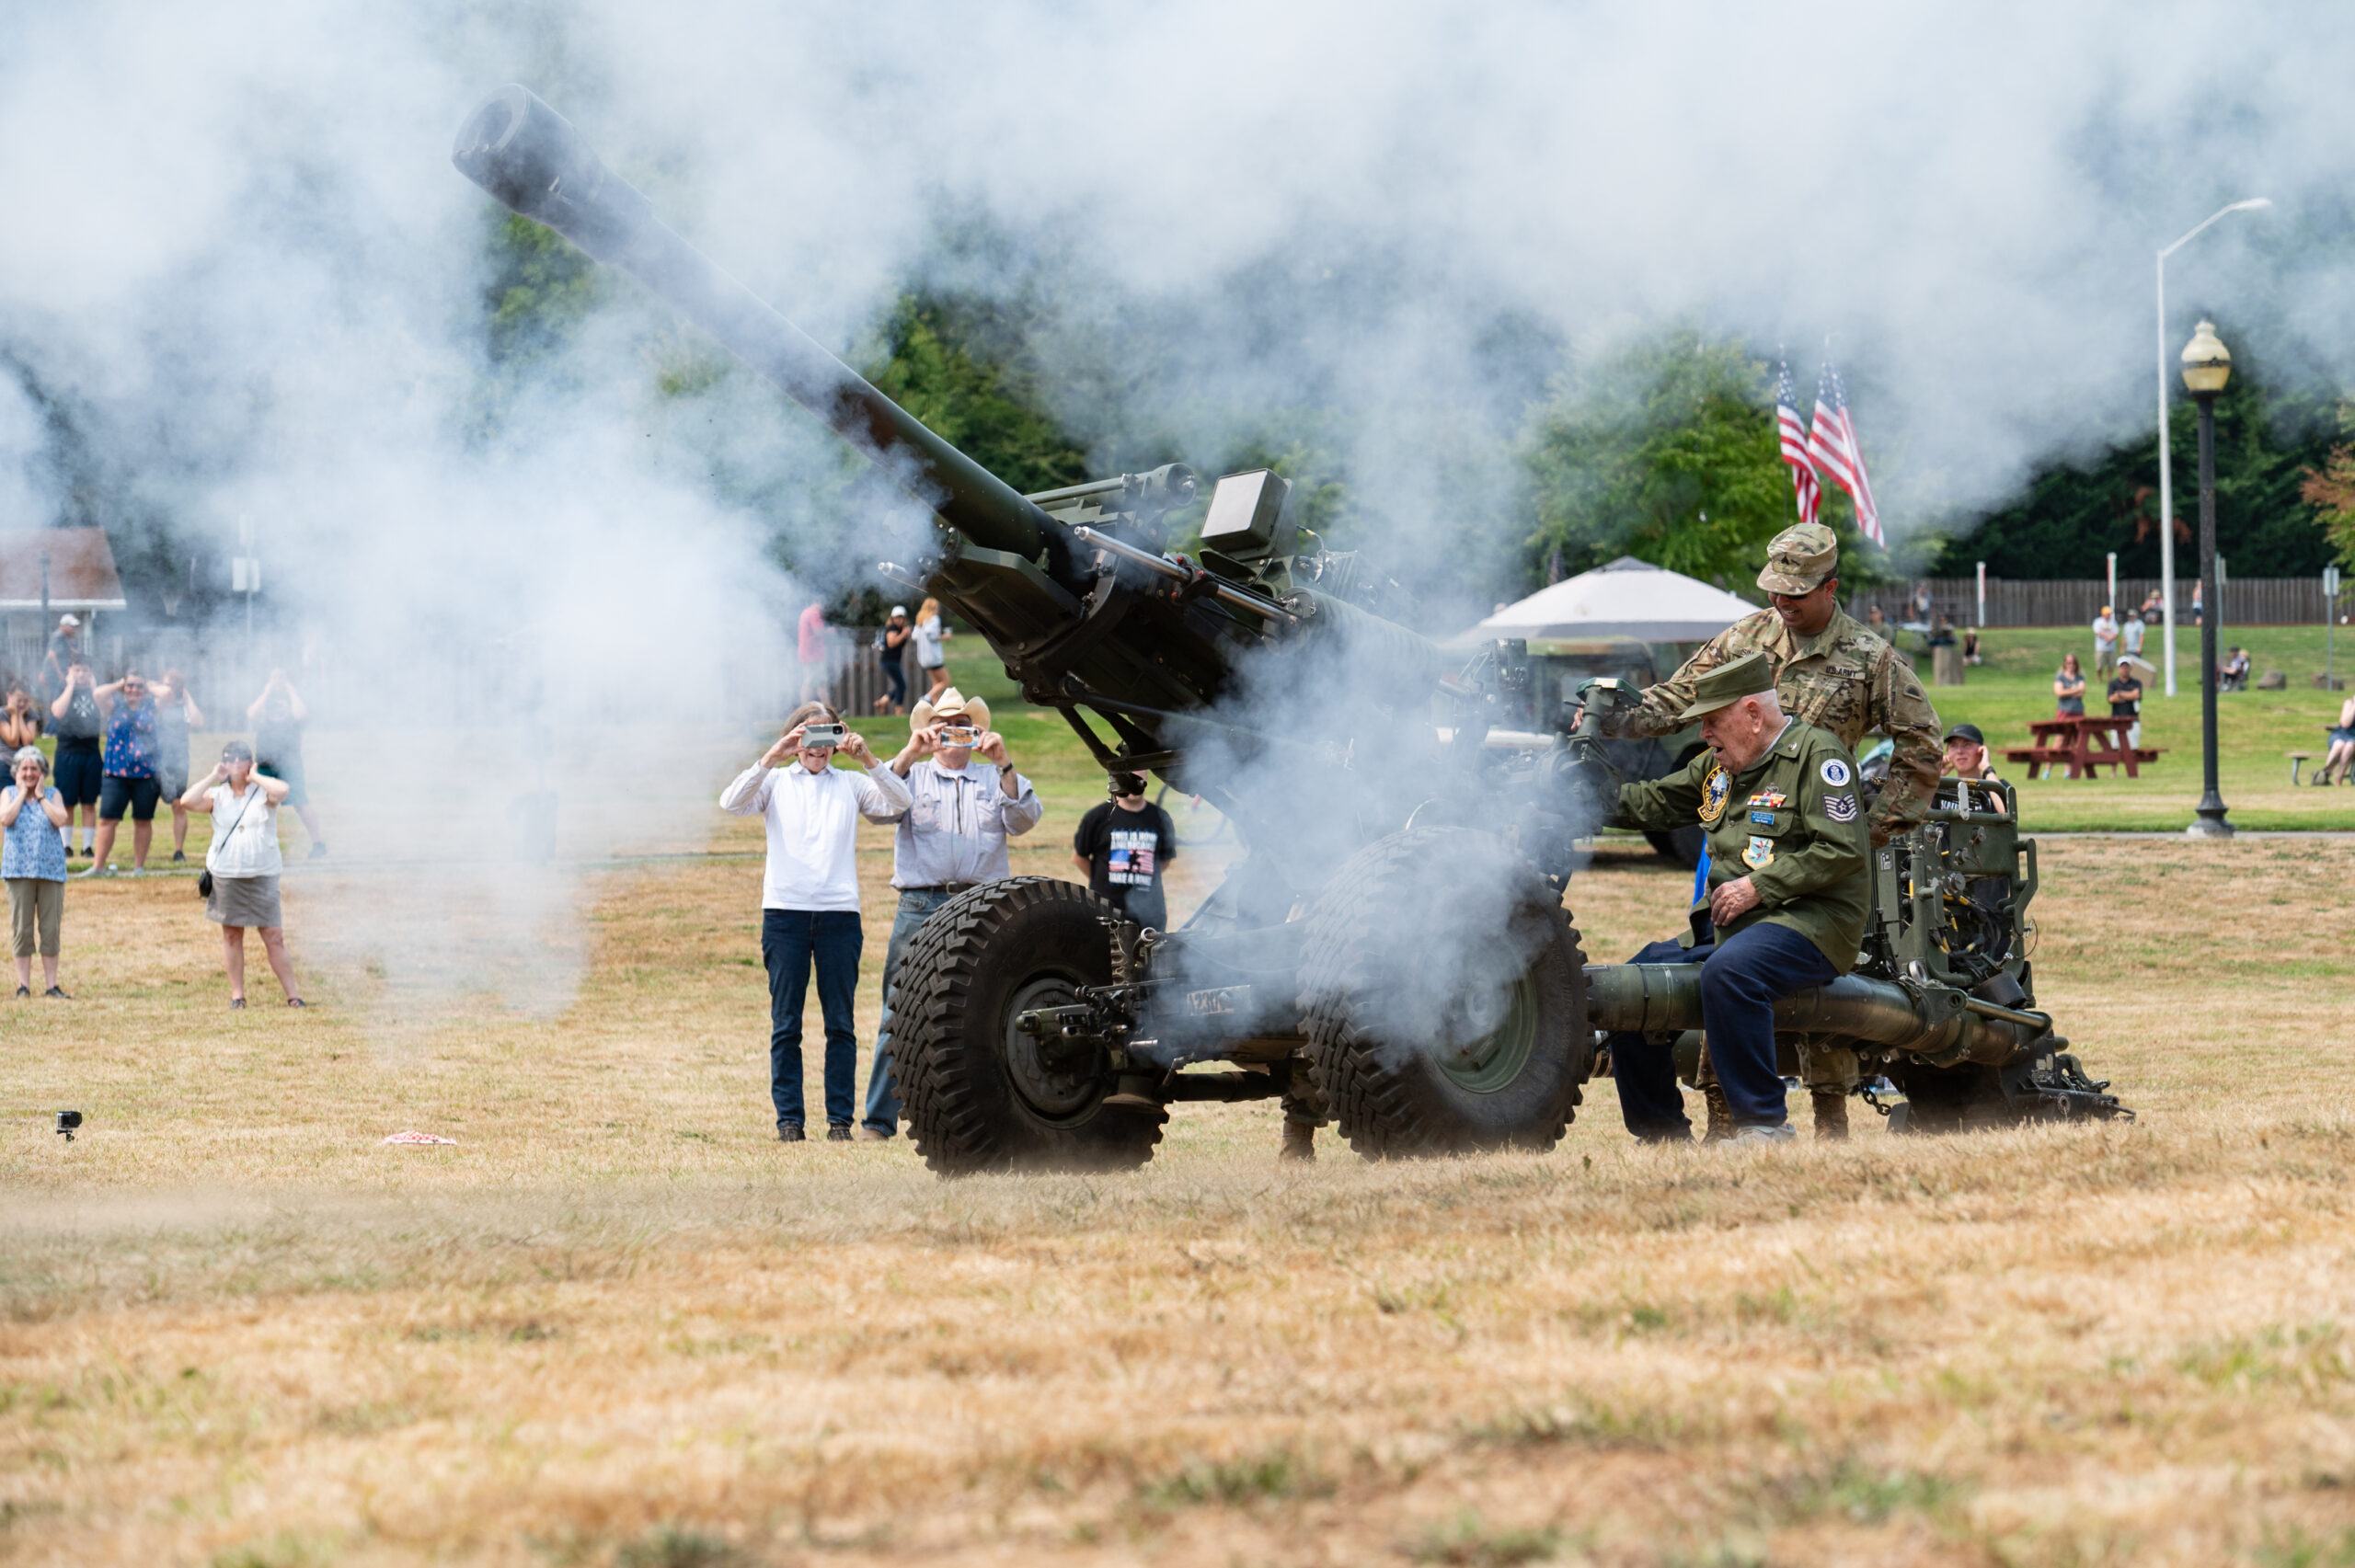 Cannon going off at a war reenactment